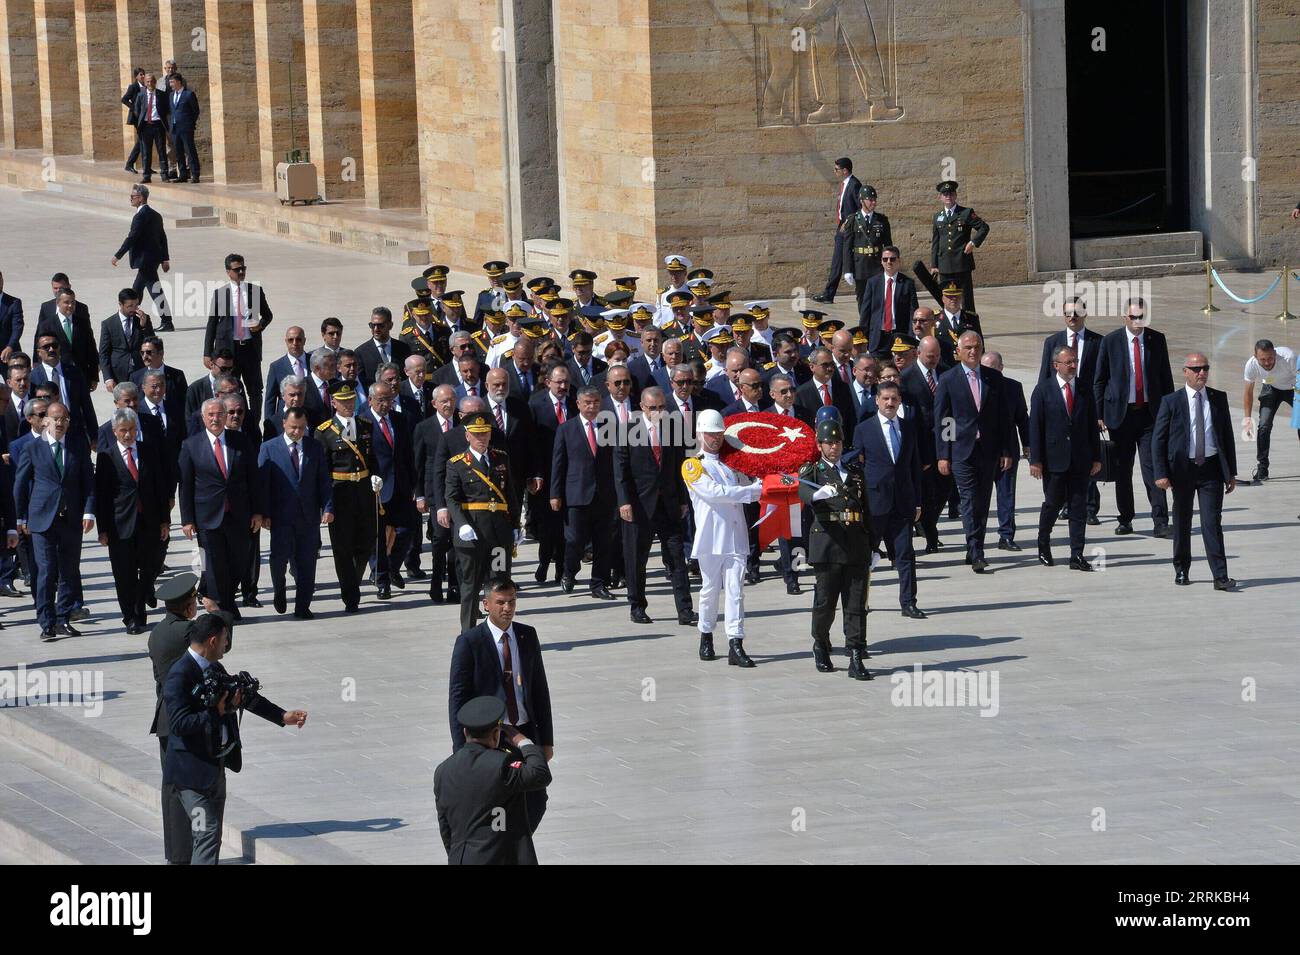 220830 -- ANKARA, Aug. 30, 2022 -- Turkish President Recep Tayyip Erdogan attends a ceremony marking the 100th anniversary of Victory Day at the Ataturk Mausoleum in Ankara, Trkiye, on Aug. 30, 2022. Trkiye celebrated on Tuesday the 100th anniversary of Victory Day, marking the Turkish victory against Greek forces in a decisive battle during the Turkish War of Independence in 1922. Photo by /Xinhua TURKEY-ANKARA-VICTORY DAY-ANNIVERSARY MustafaxKaya PUBLICATIONxNOTxINxCHN Stock Photo